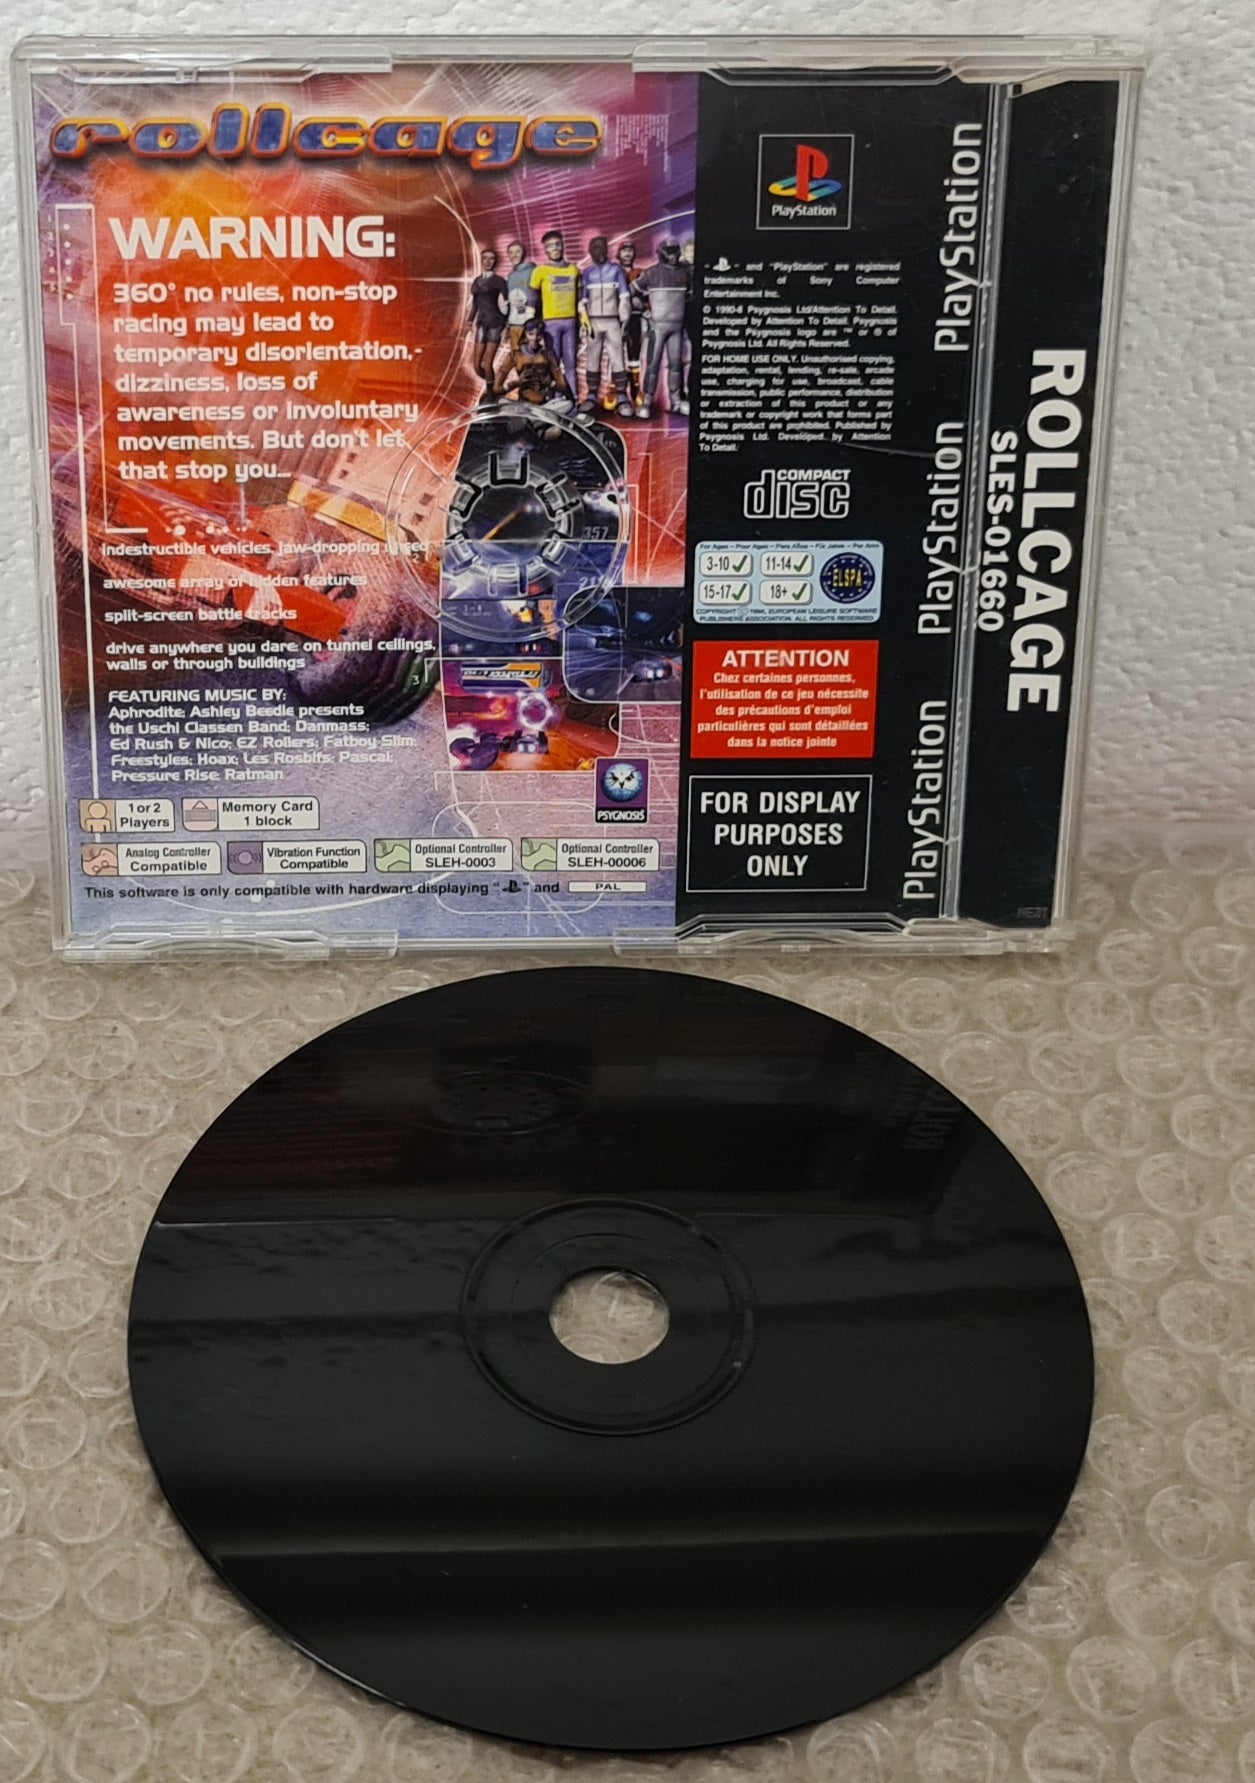 Rollcage Sony Playstation 1 (PS1) RARE Demo Game